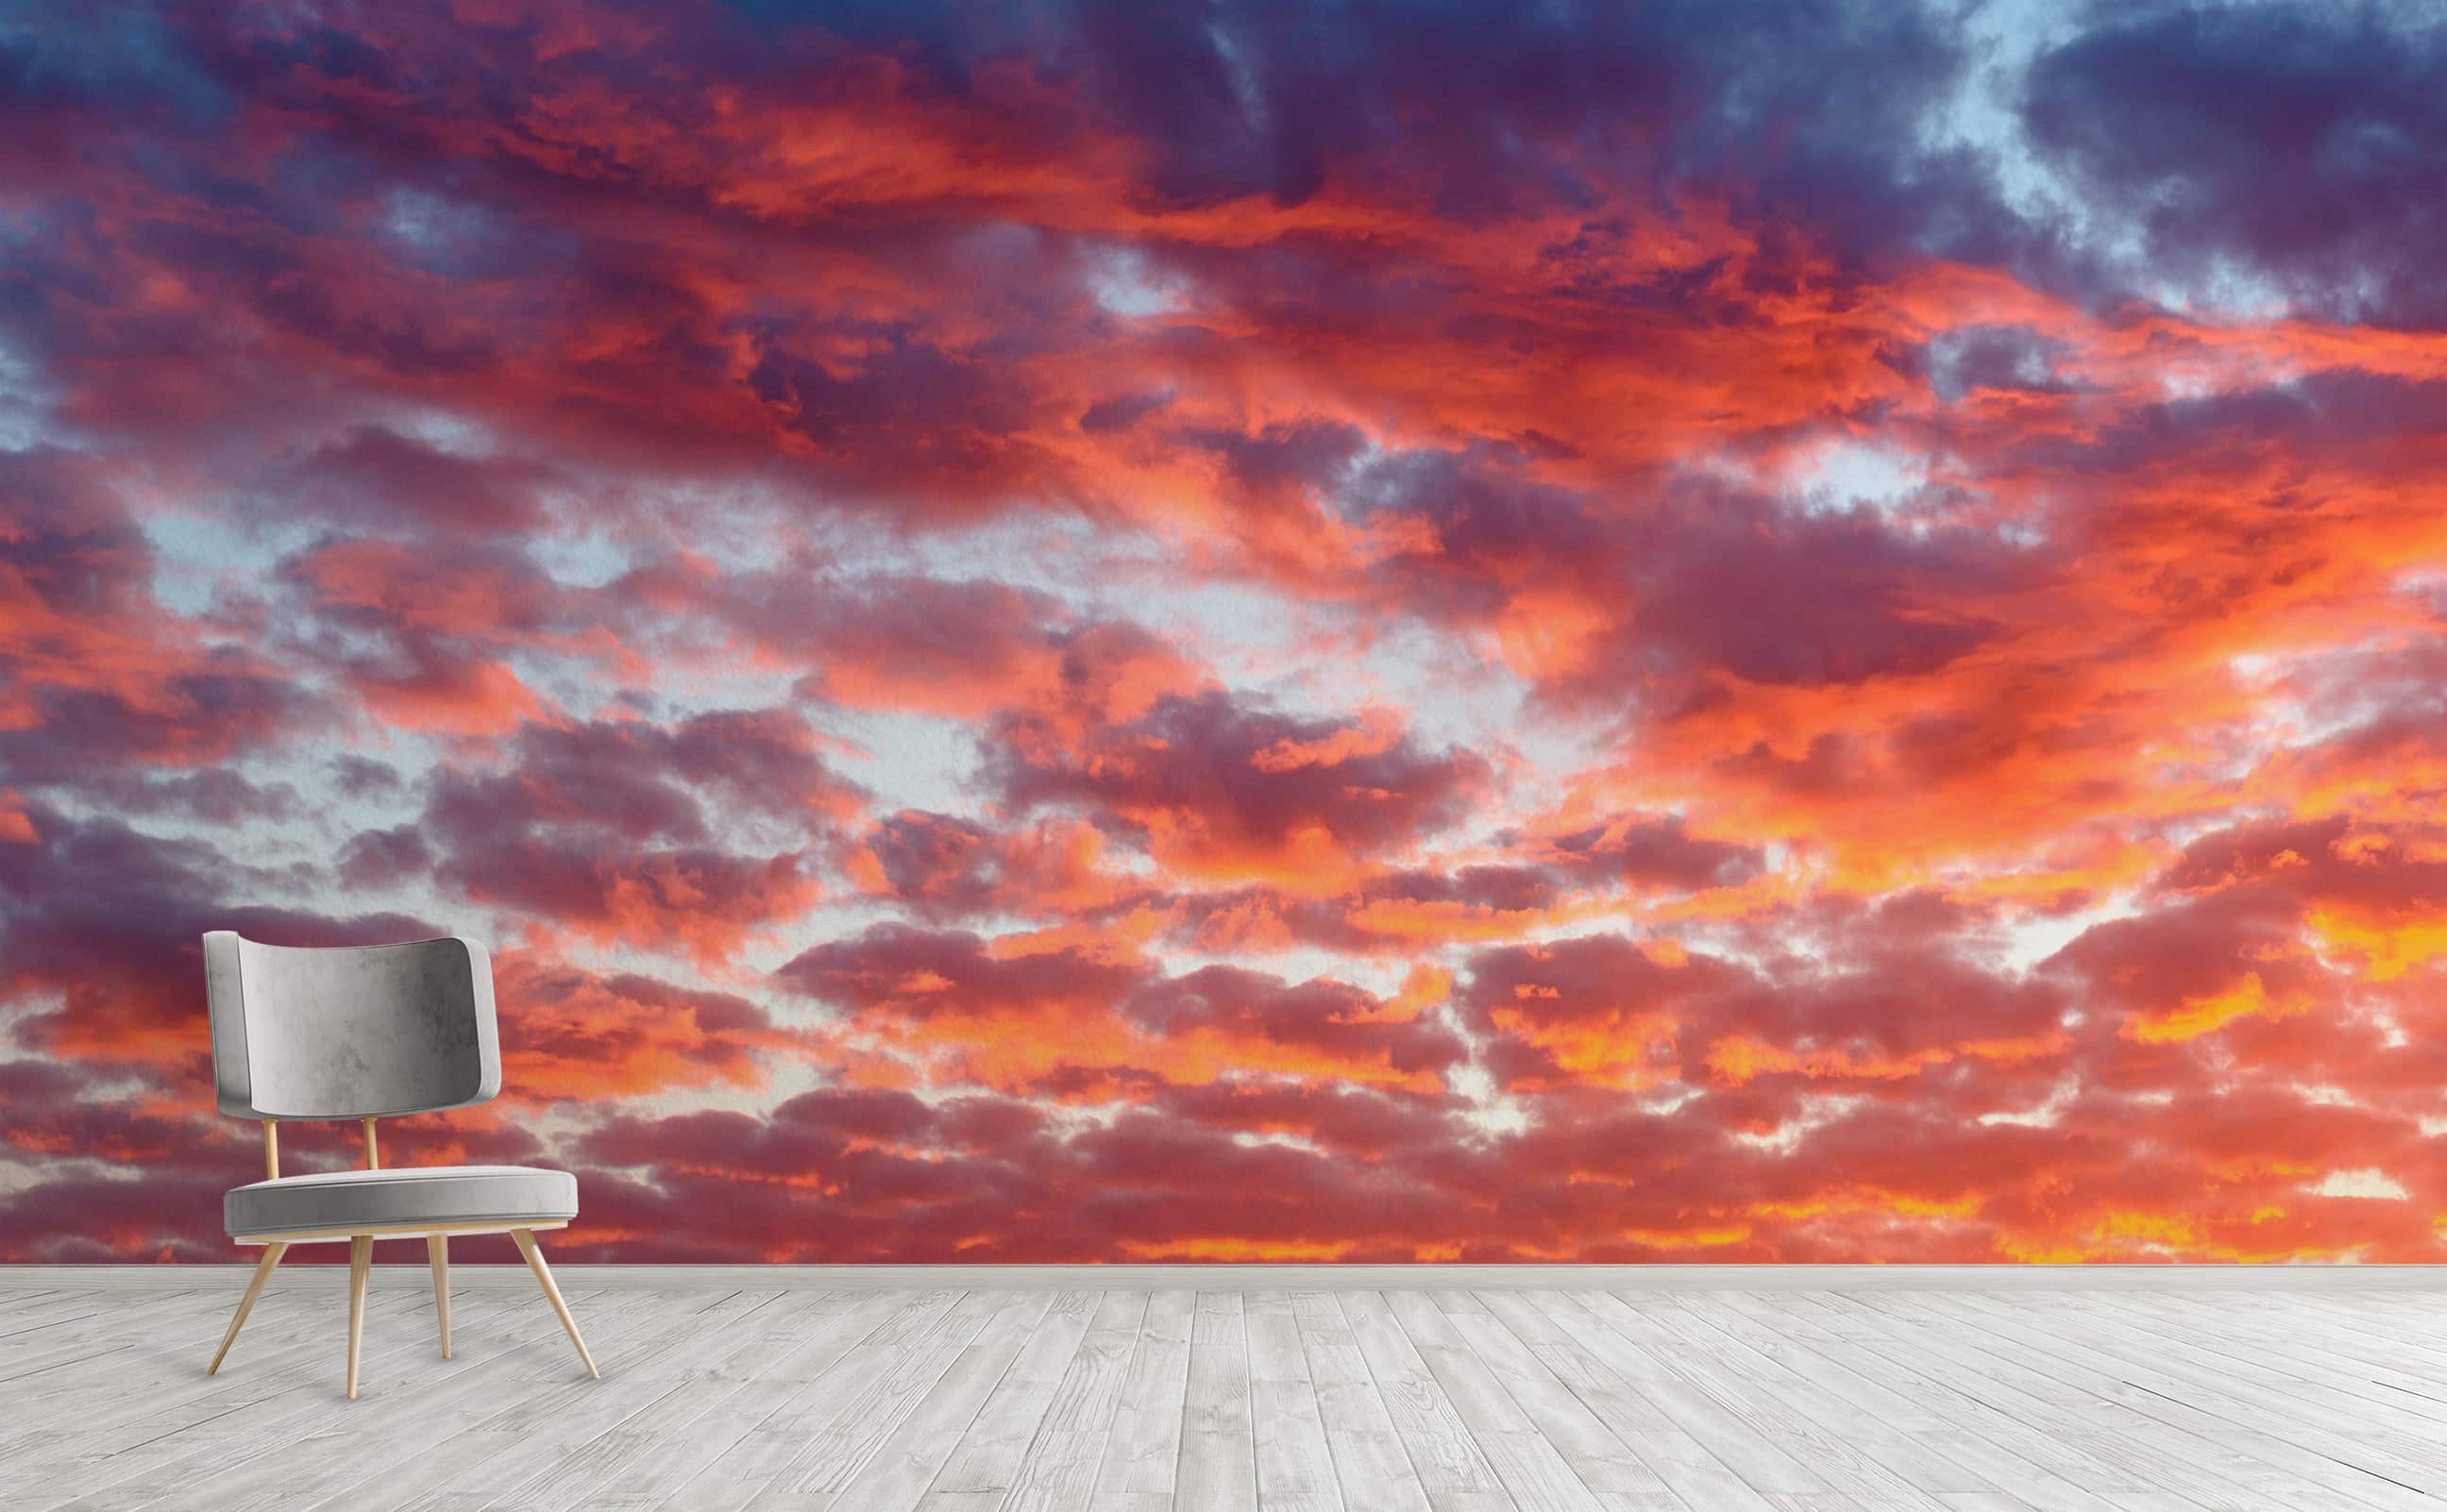 Eternal Sunset Wall Mural by Walls Need Love┬«